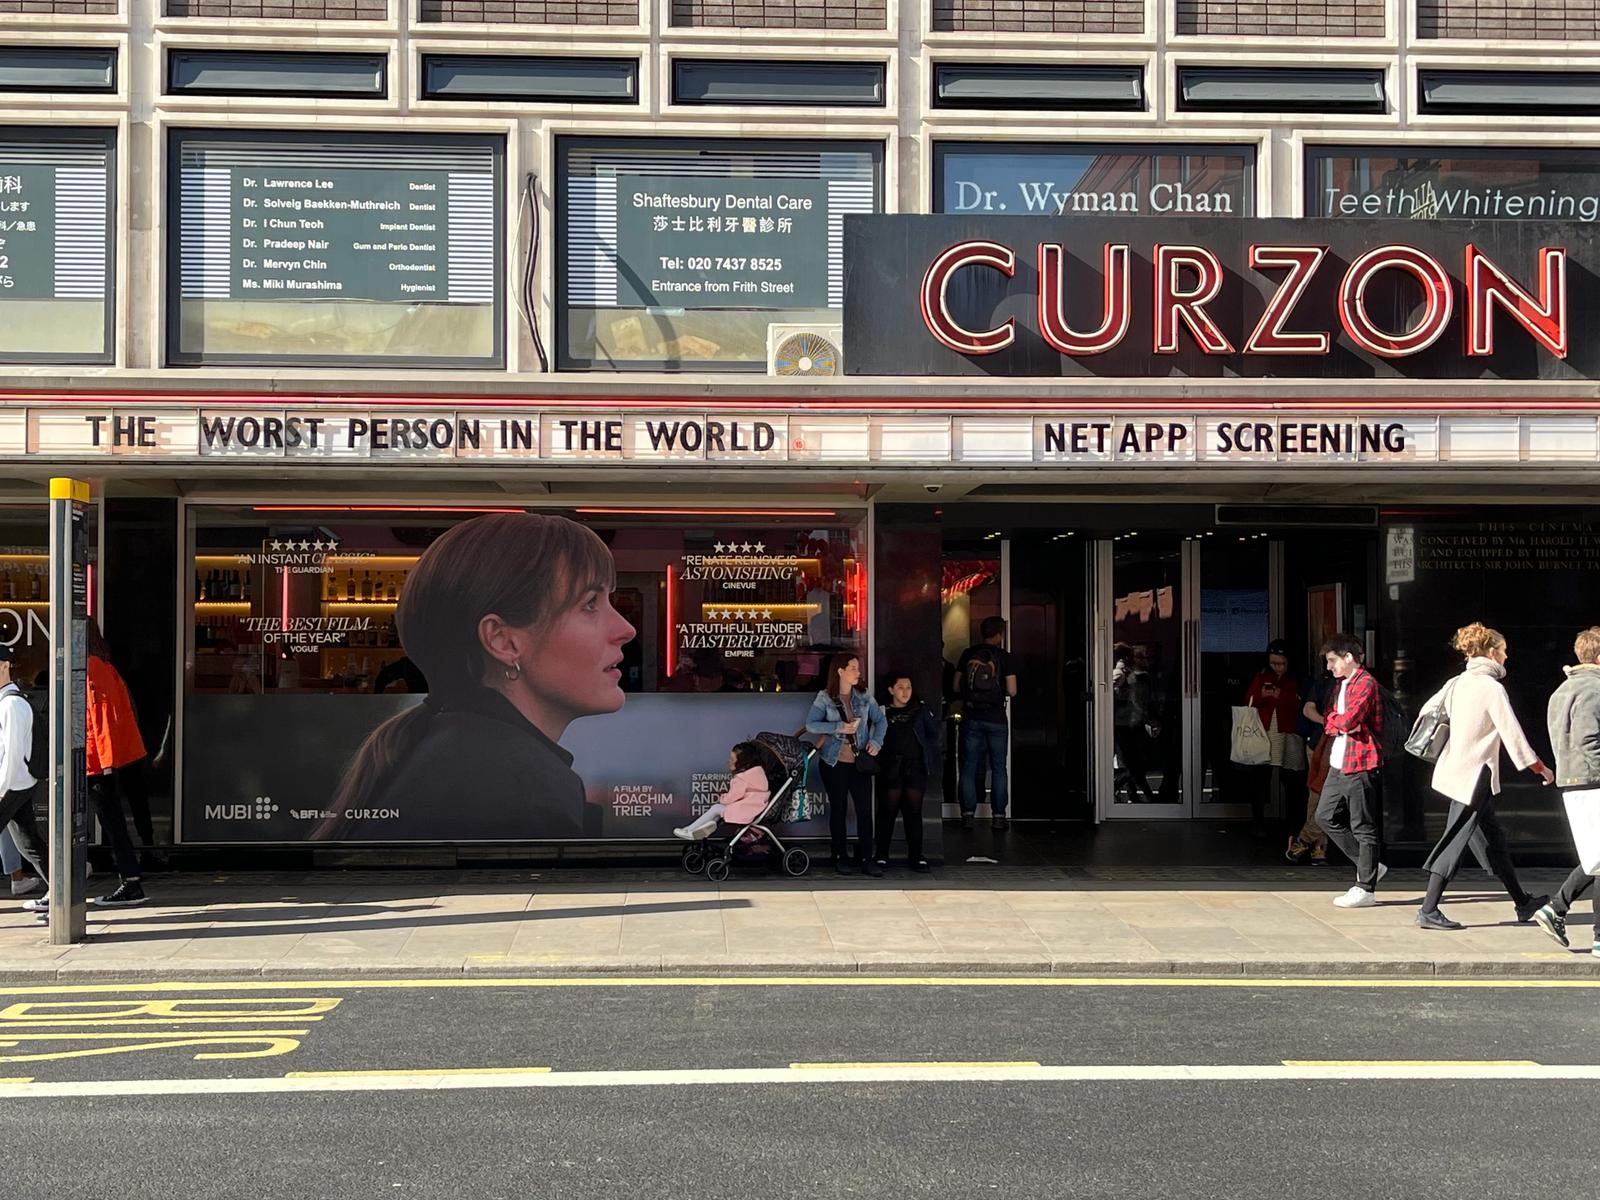 Curzon theatre with titles the worst person in the world and netappscreening